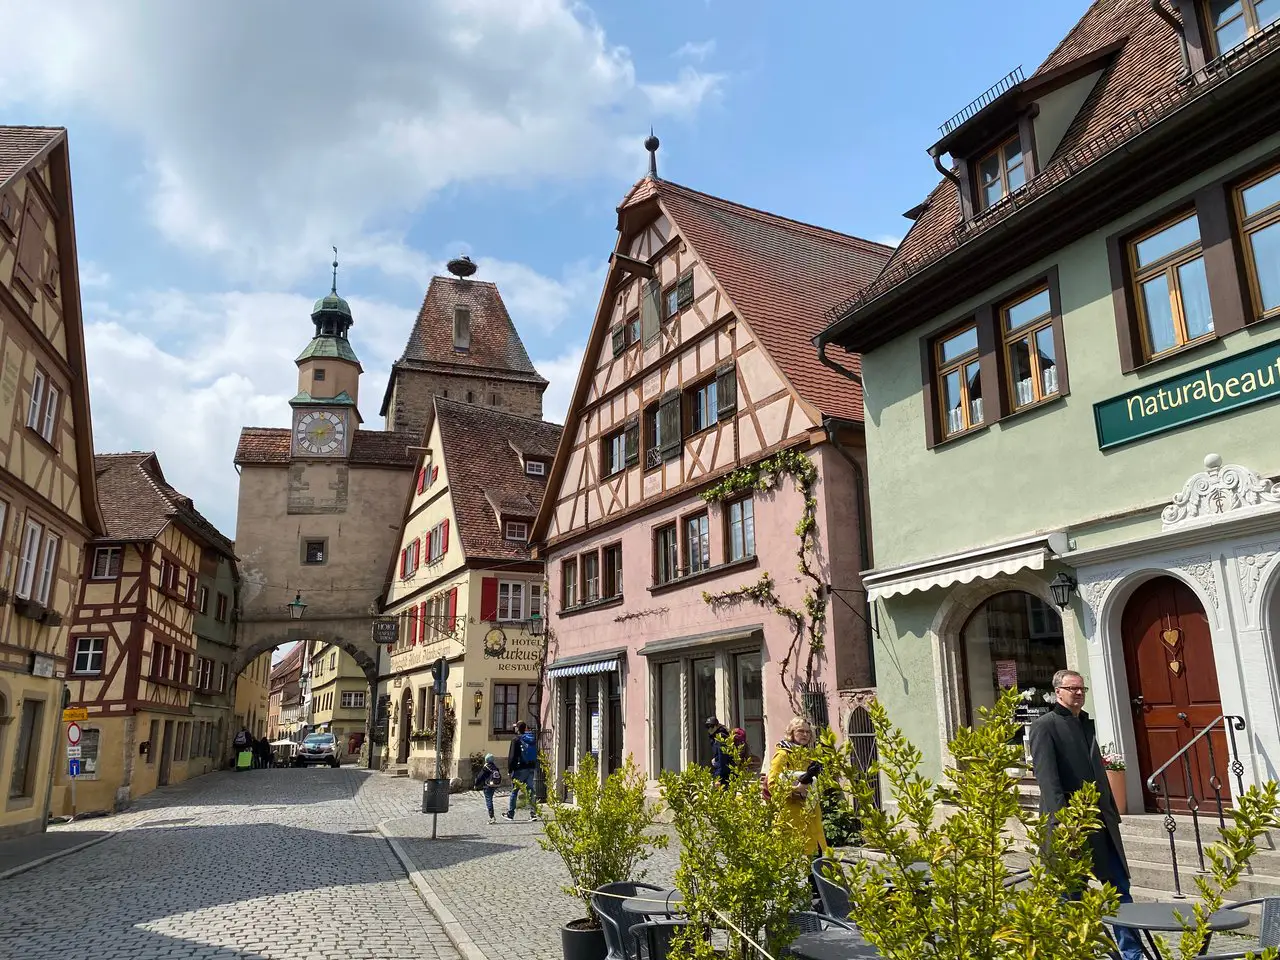 Pastel-coloured buildings with wood timber in Rothenburg ob der Tauber Germany